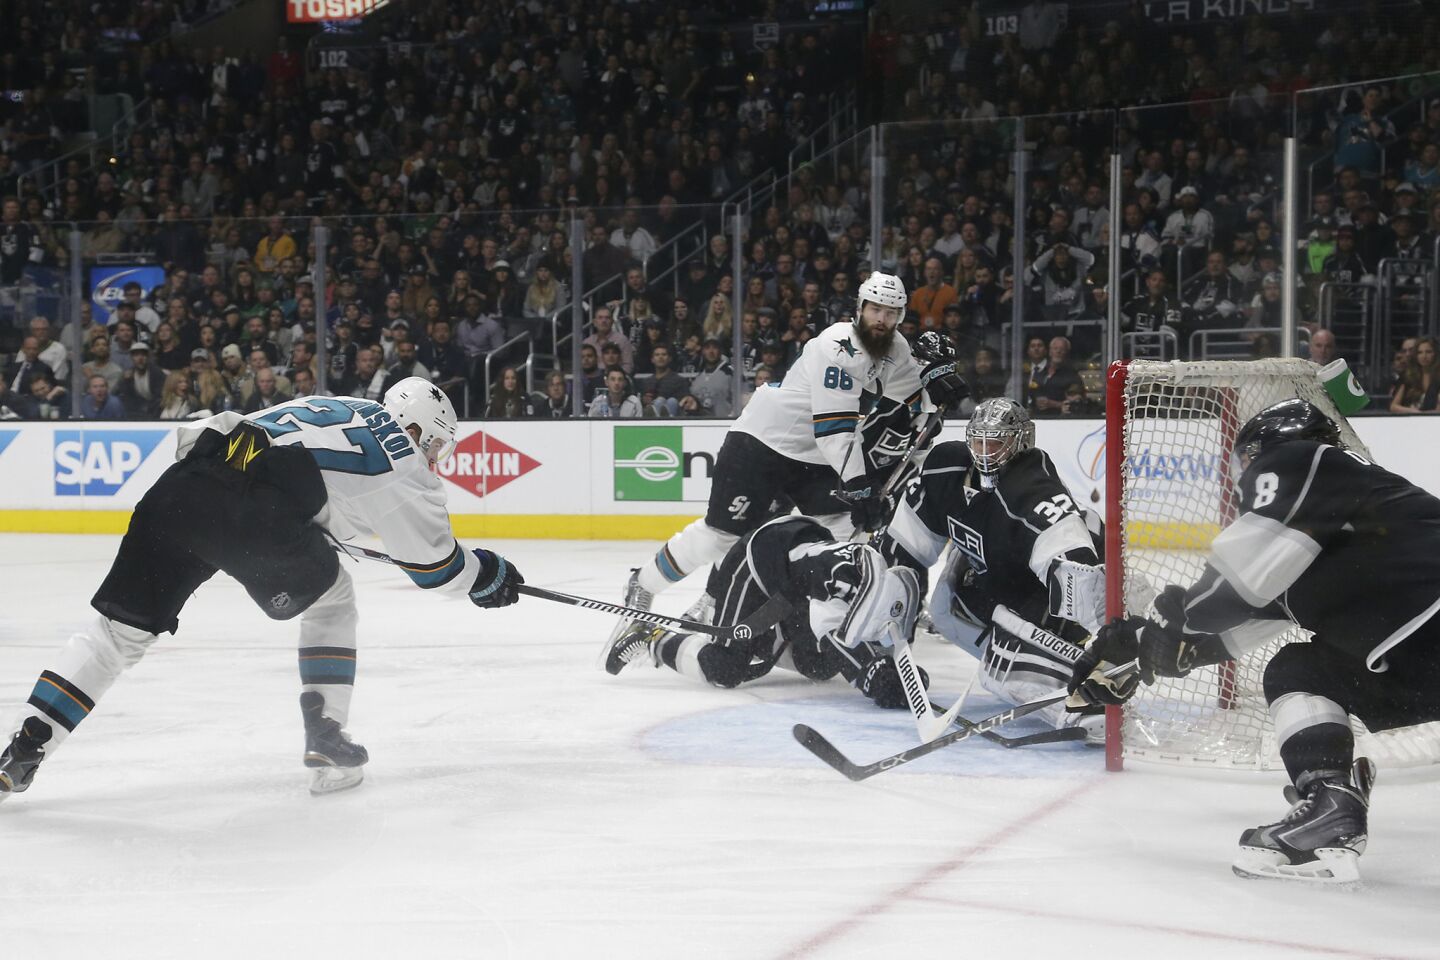 Sharks forward Jonas Donskoi scores a third period goal against the Kings during a game at Staples Center on April 22.